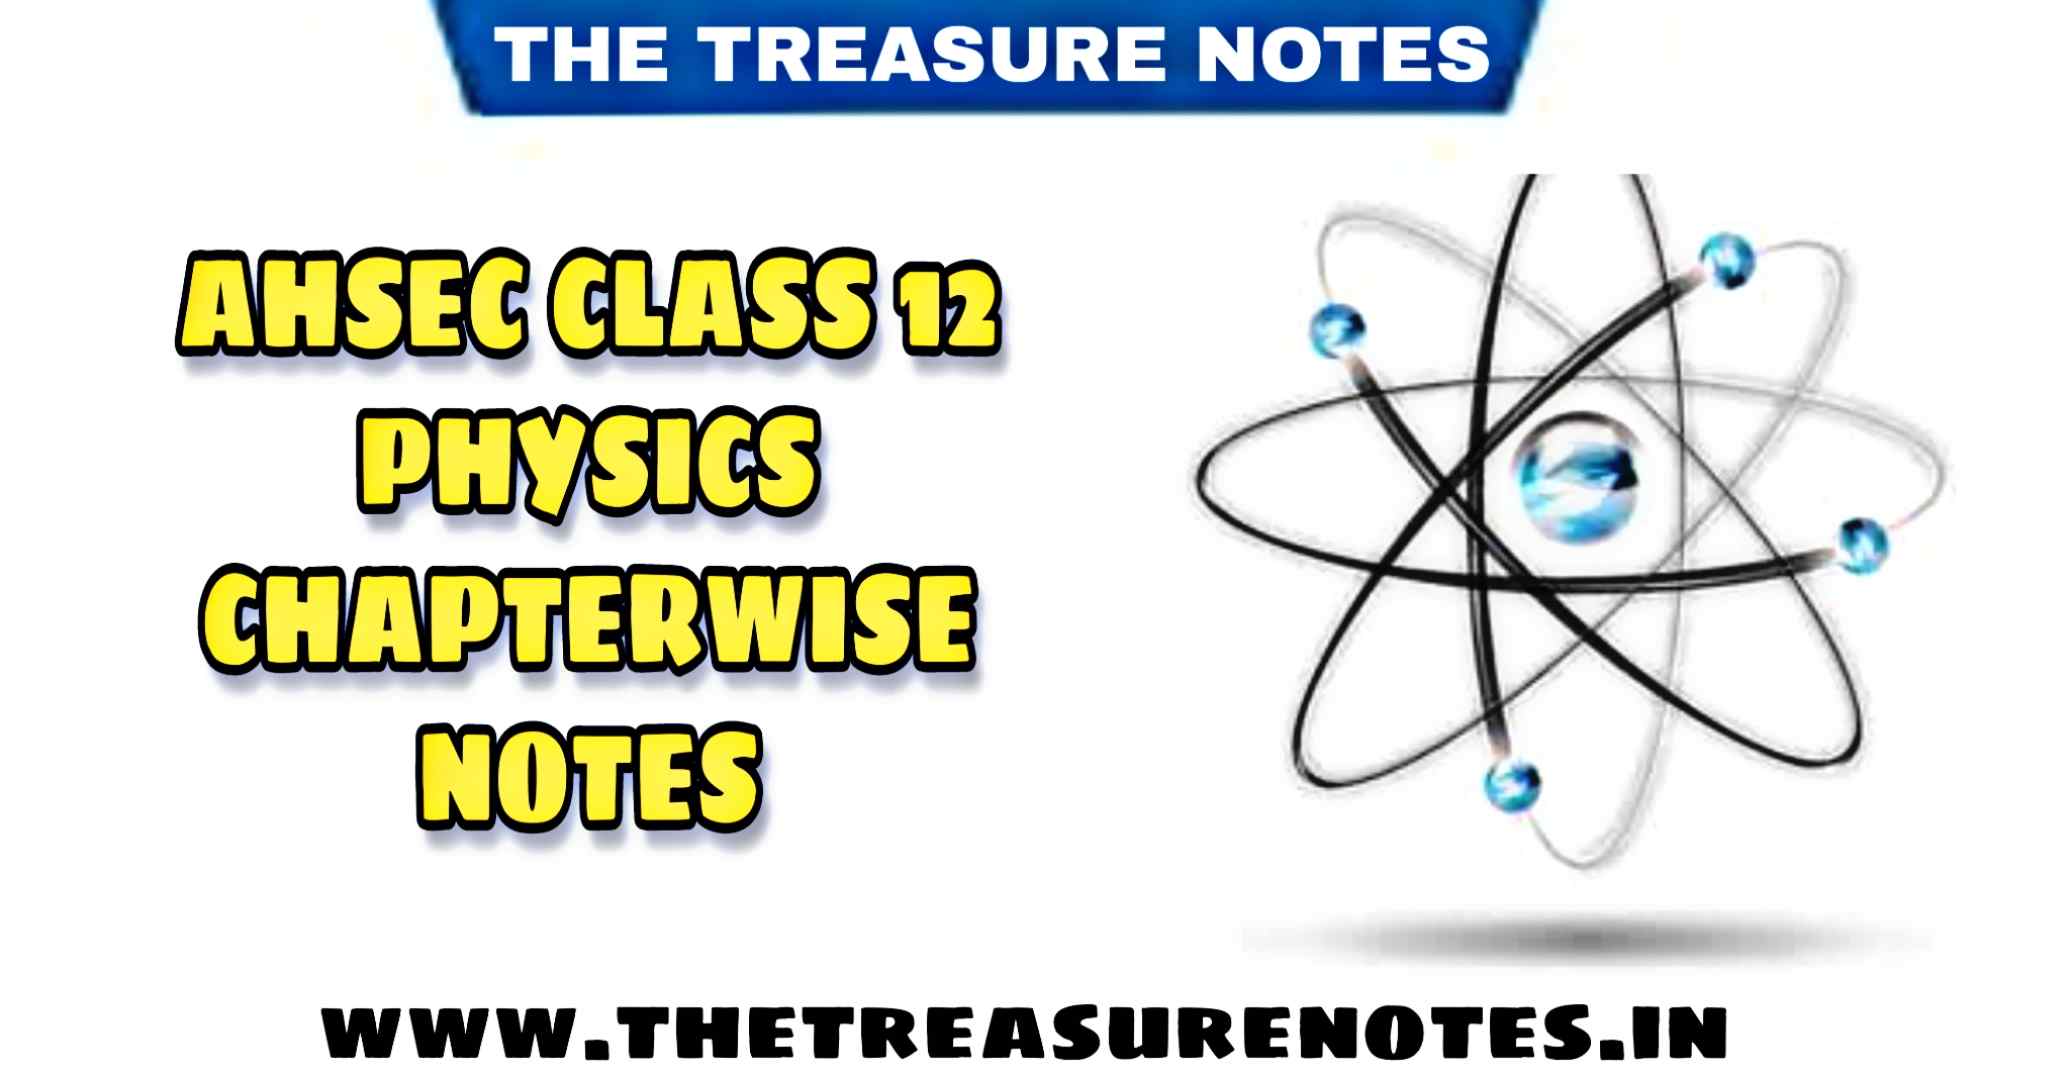 AHSEC Class 12 Physics Notes  Solutions for 2023 | (CHAPTERWISE) HS 2nd Year Complete Physics Notes | ,Class 12 Physics Chapter 1 Electric Charges and FieldsClass 12 Physics Chapter 2 Electrostatic Potential and CapacitanceClass 12 Physics Chapter 3 Current ElectricityClass 12 Physics Chapter 4 Moving Charges and MagnetismClass 12 Physics Chapter 5 Magnetism and MatterClass 12 Physics Chapter 6 Electromagnetic InductionClass 12 Physics Chapter 7 Alternating CurrentClass 12 Physics Chapter 8 Electromagnetic WavesClass 12 Physics Chapter 9 Ray Optics and Optical InstrumentsClass 12 Physics Chapter 10 Wave OpticsClass 12 Physics Chapter 11 Dual Nature of Radiation and MatterClass 12 Physics Chapter 12 AtomsClass 12 Physics Chapter 13 NucleiClass 12 Physics Chapter 14 Semiconductor electronics: materials; devices and simple circuits